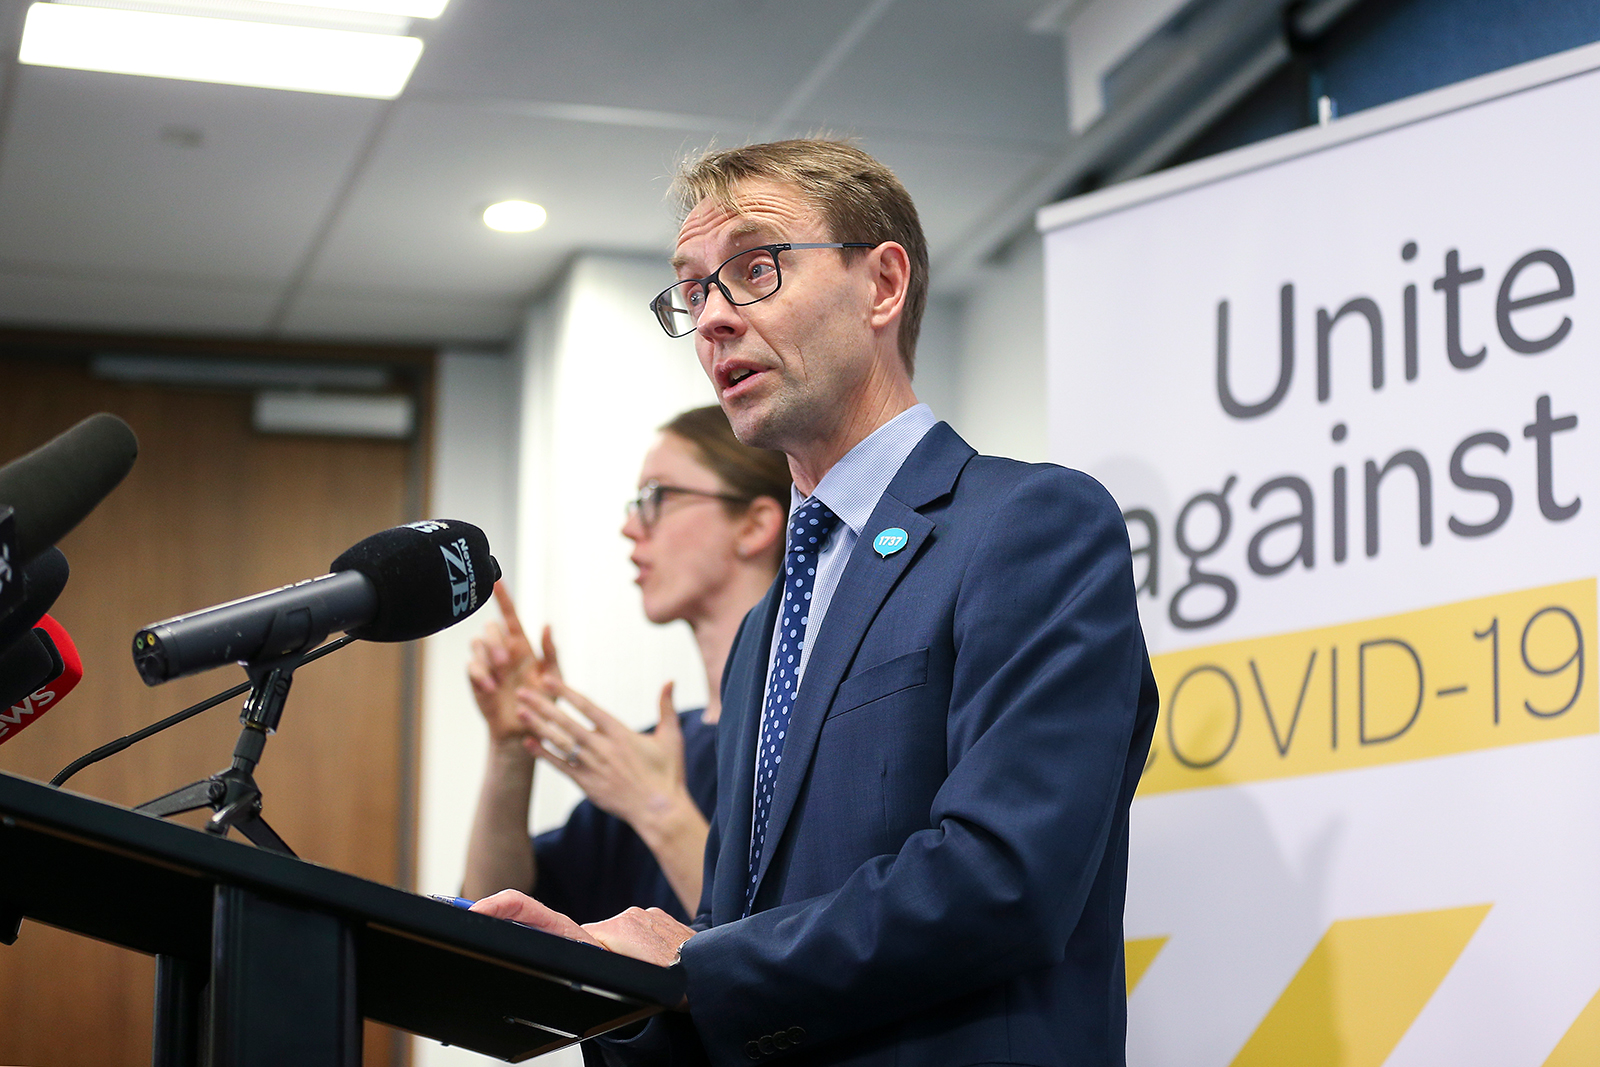 Director-General of Health Dr. Ashley Bloomfield speaks to media during a press conference at Ministry of Health in Wellington, New Zealand, on August 17.